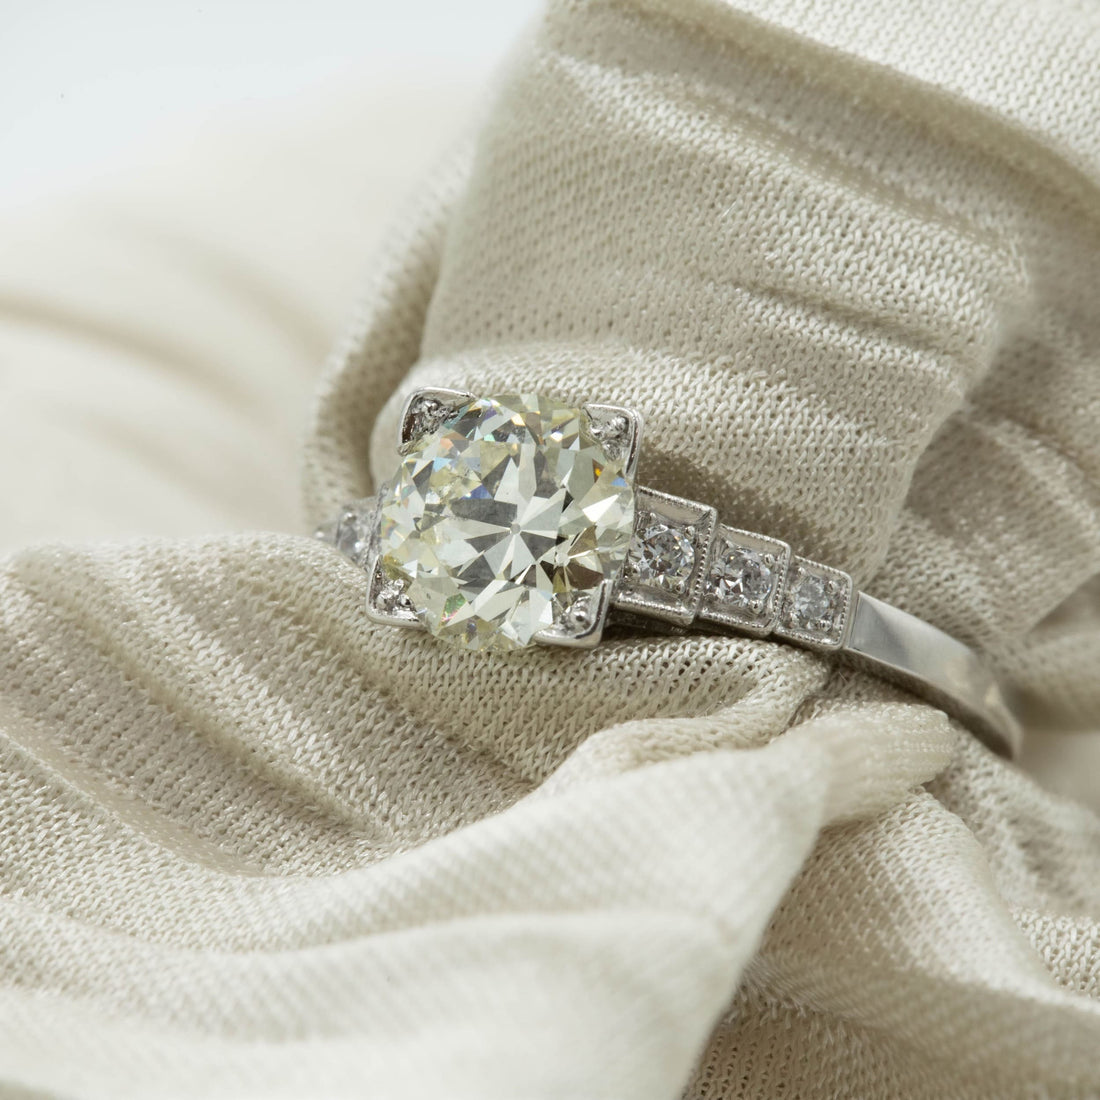 The Timeless Beauty of Vintage Rings